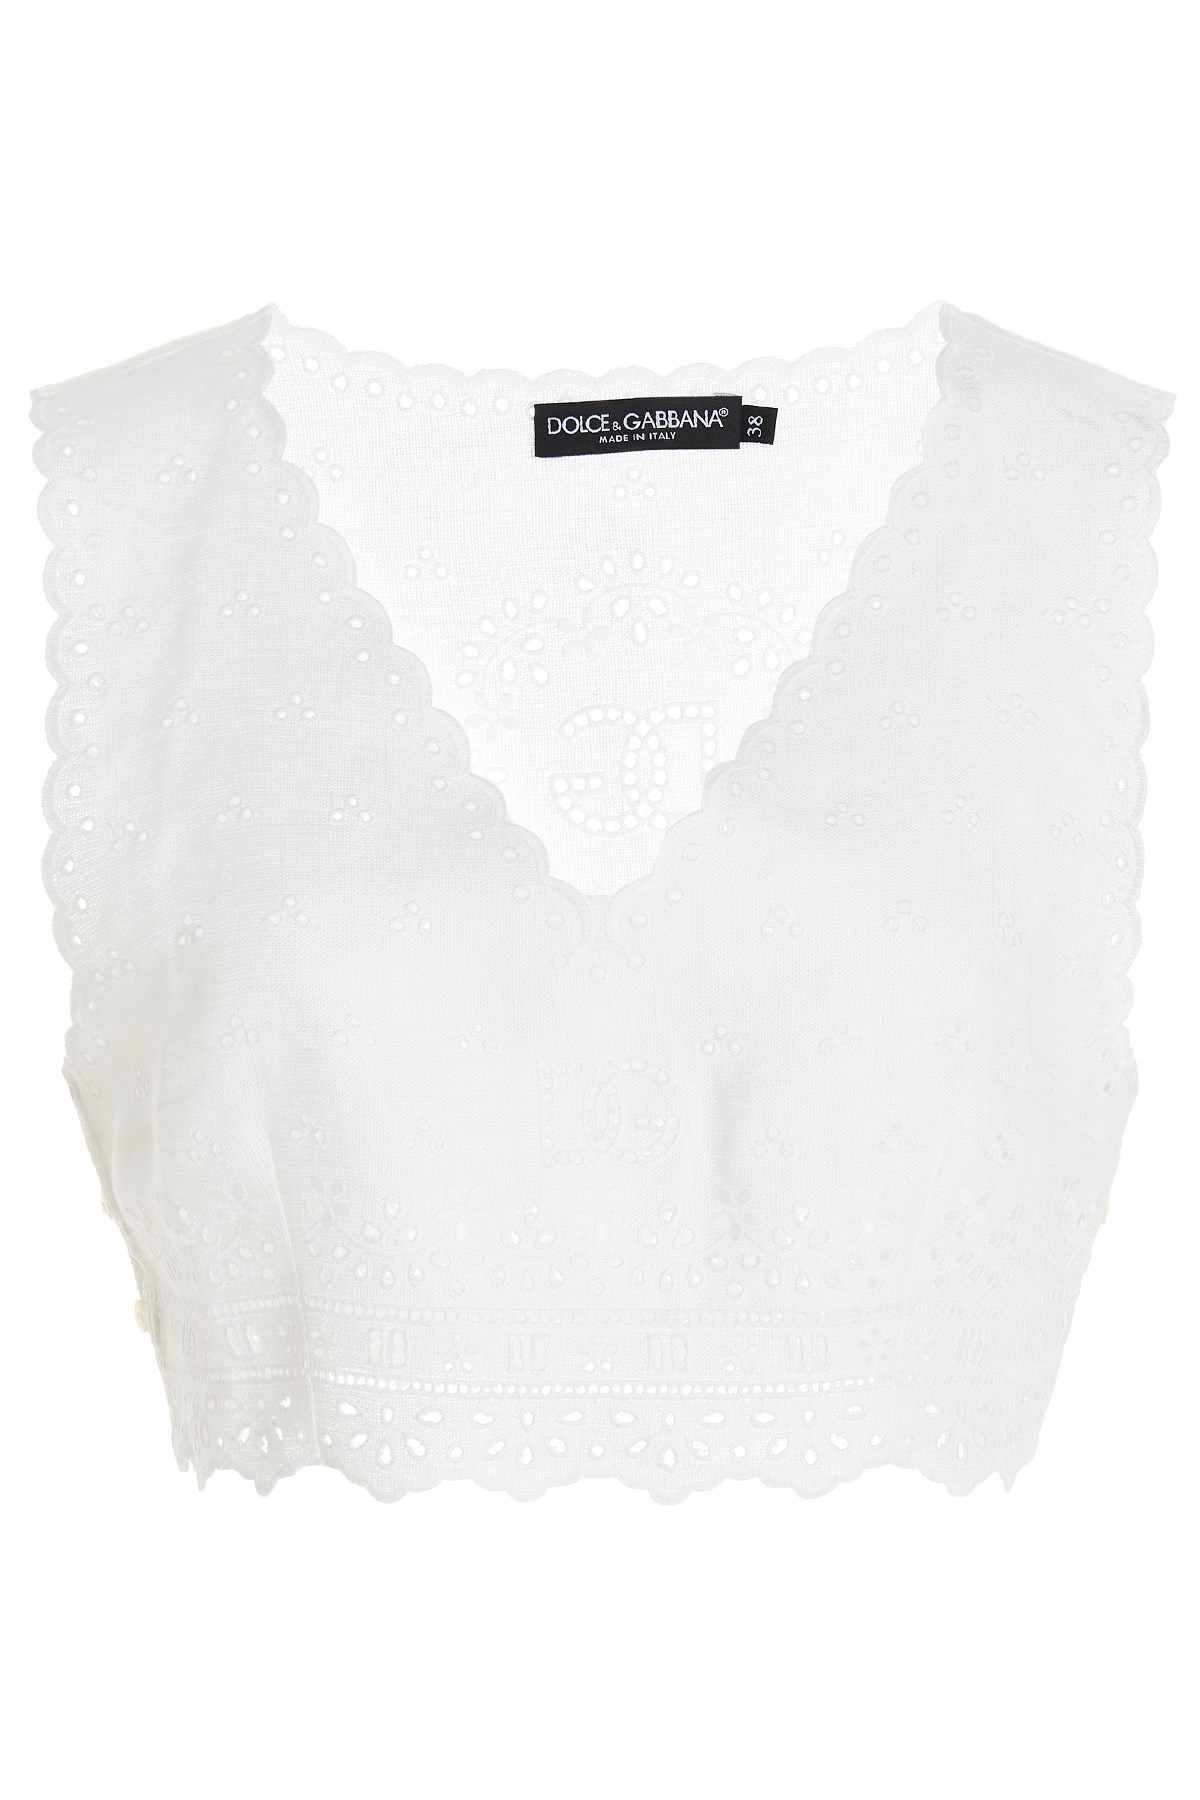 DOLCE & GABBANA Broderie Anglaise Top